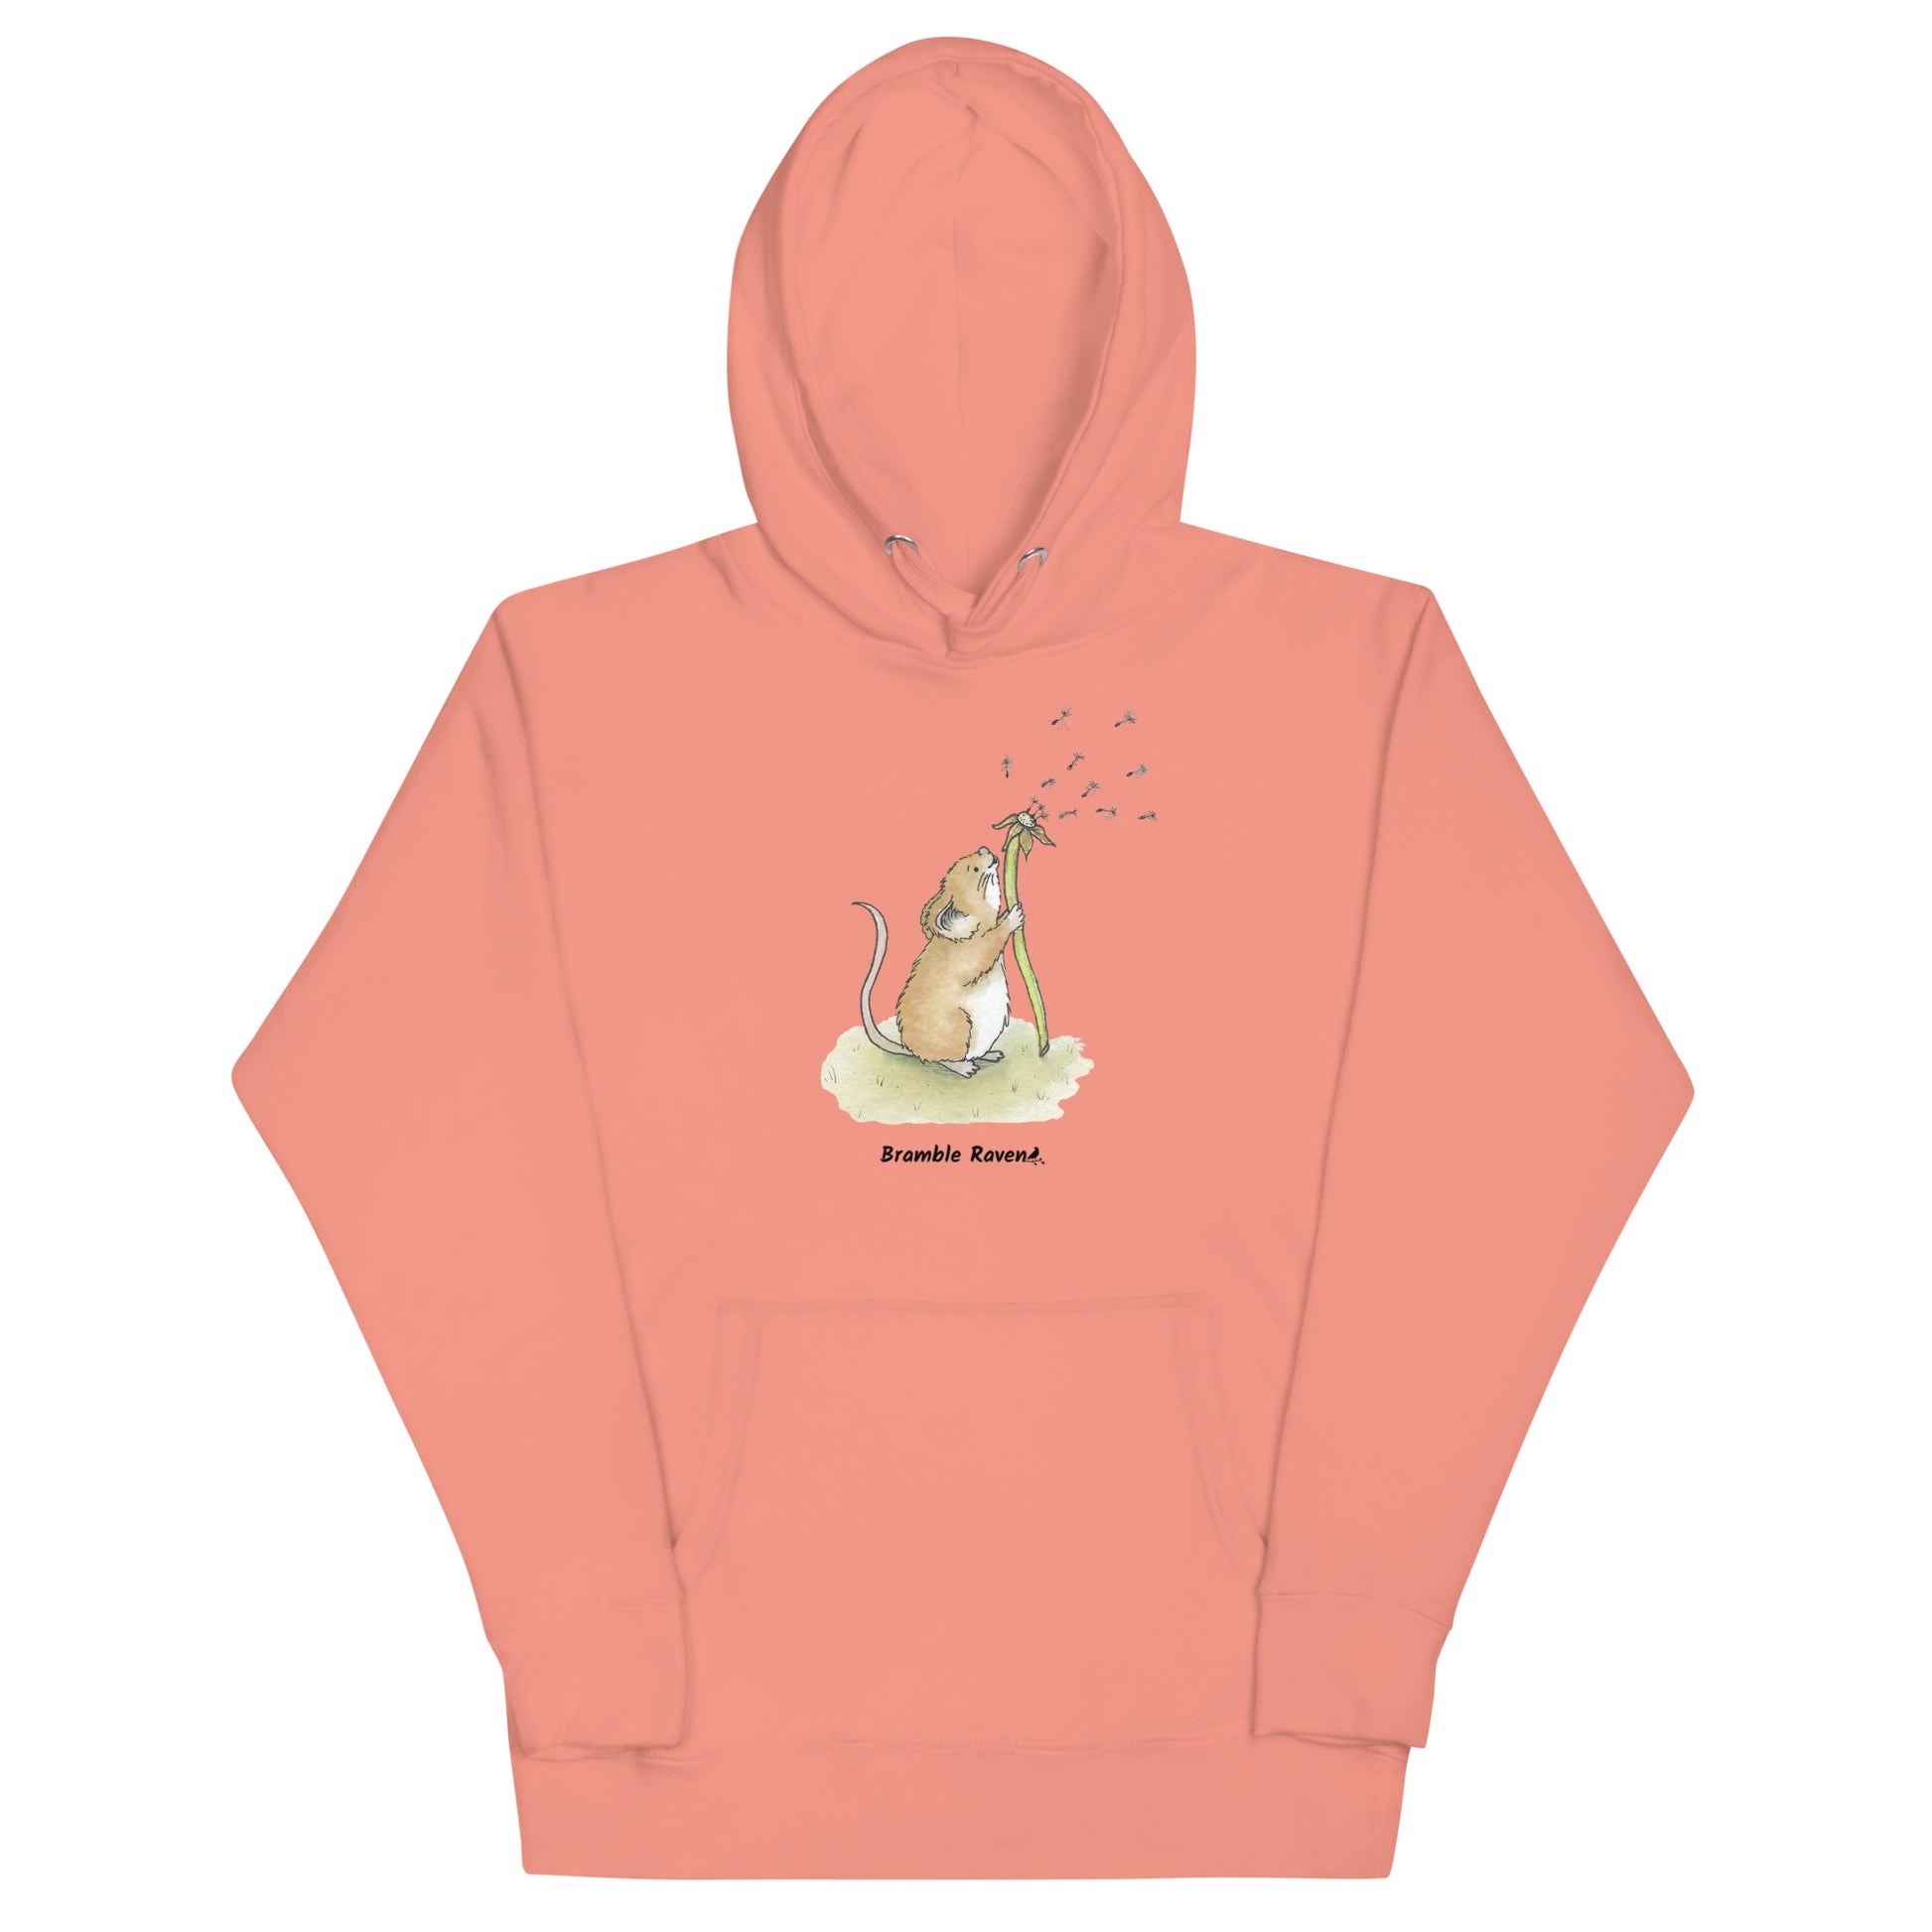 Original Dandelion wish design of cute watercolor mouse blowing dandelion seeds  featured on unisex dusty rose colored hoodie.